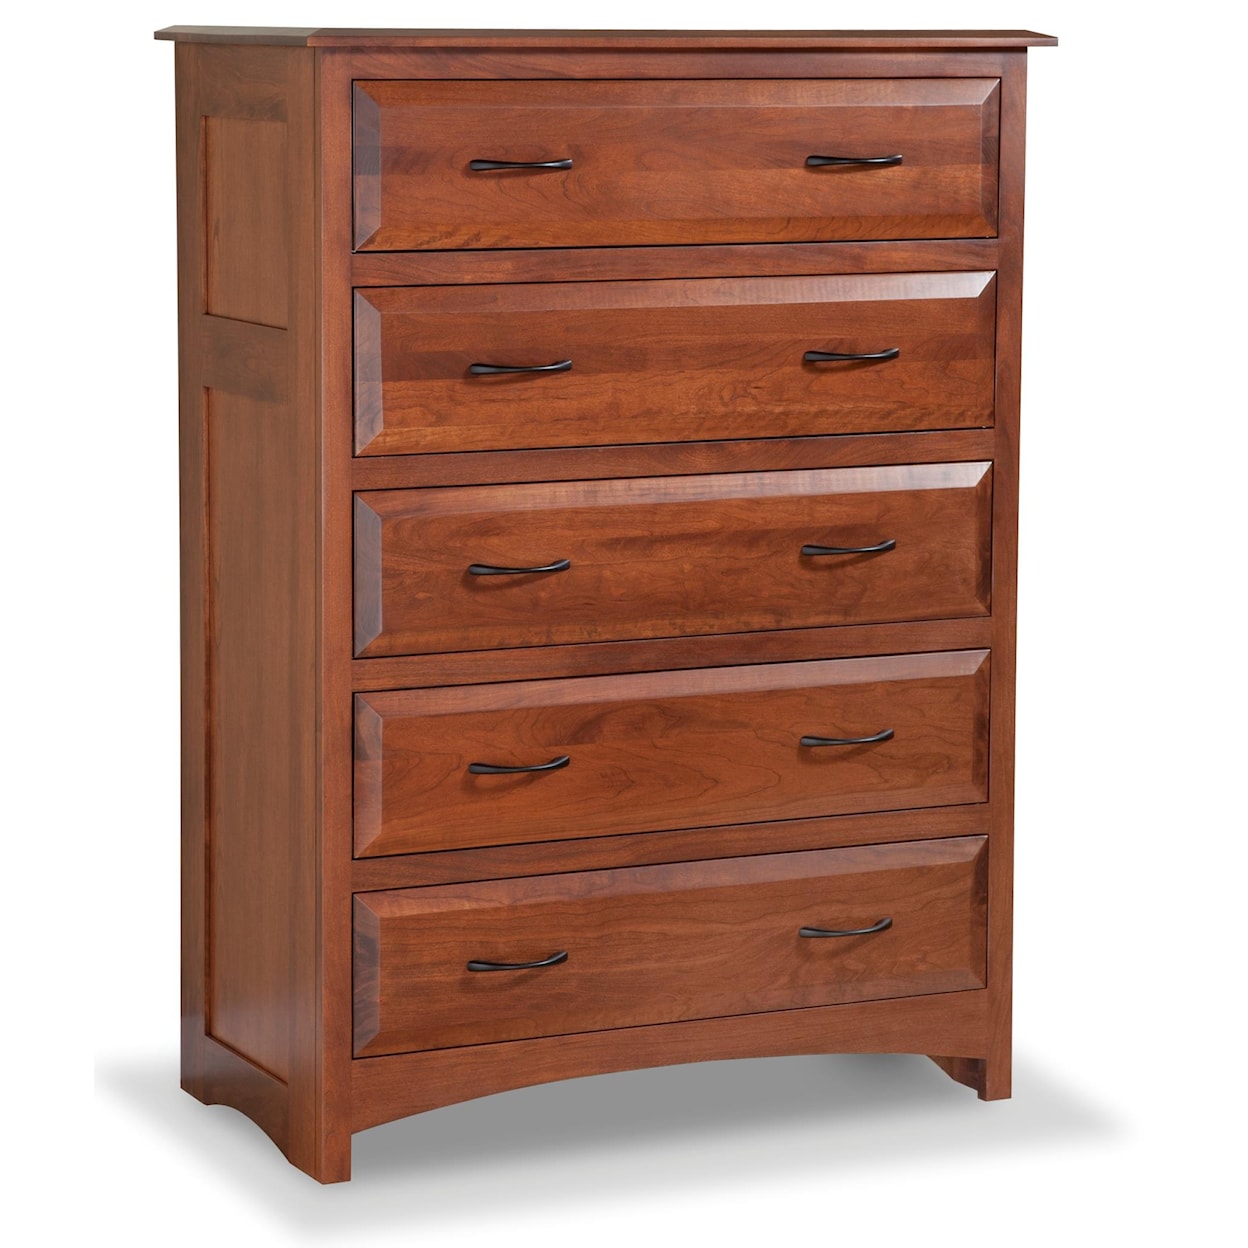 Daniels Amish Simplicity 5-Drawer Chest